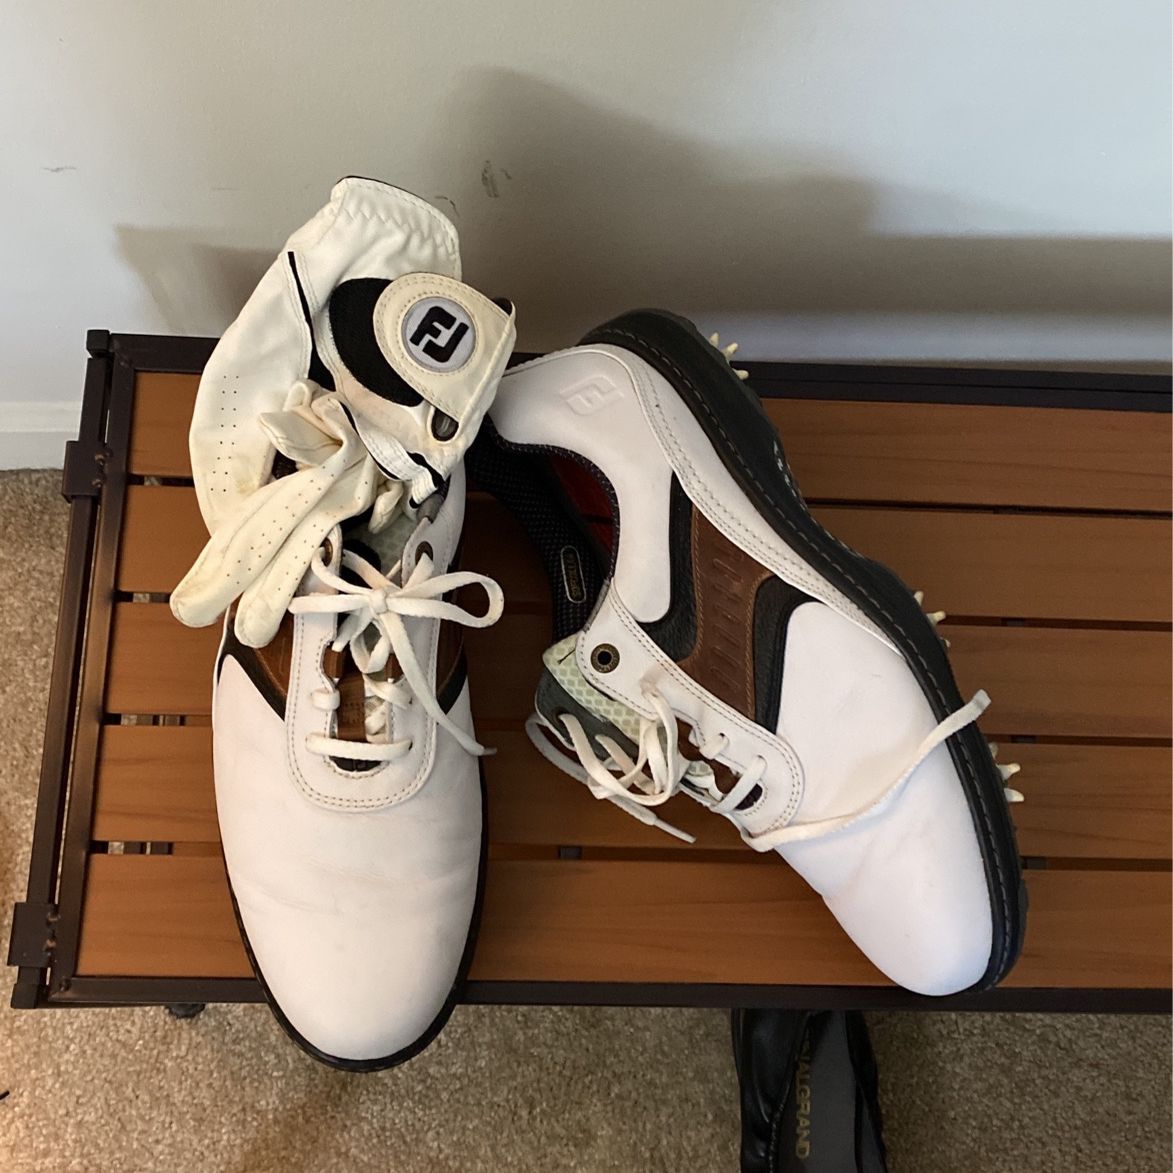 Men’s White Side brown/black Leather Golf Shoes, Cal away Golf Balls